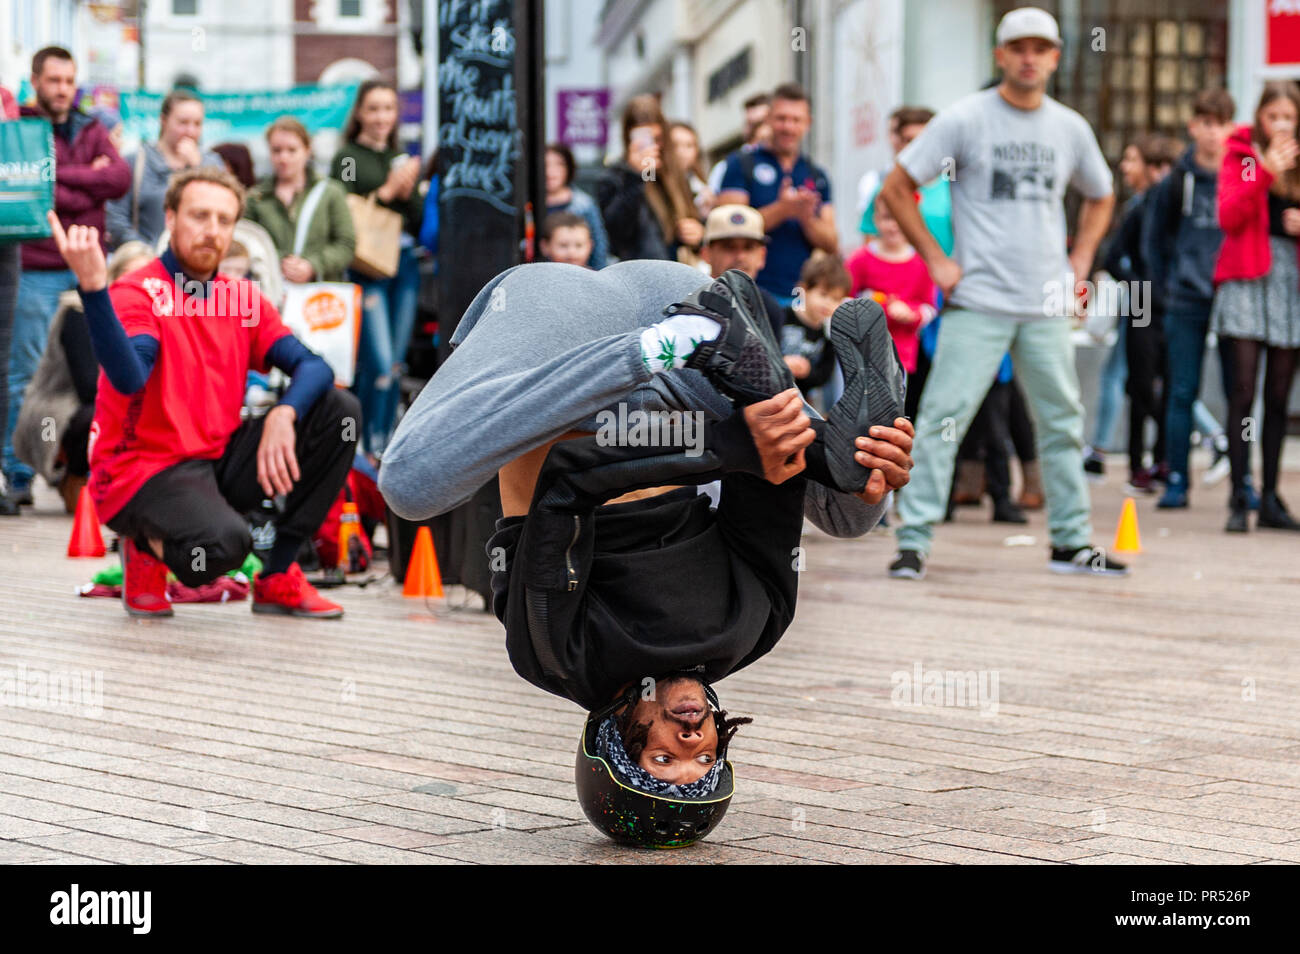 https://c8.alamy.com/comp/PR526P/cork-ireland-29th-sept-2018-chopstix-of-sog-break-dance-crew-from-dublin-performs-in-front-of-shoppers-on-a-busy-saturday-afternoon-credit-andy-gibsonalamy-live-news-PR526P.jpg